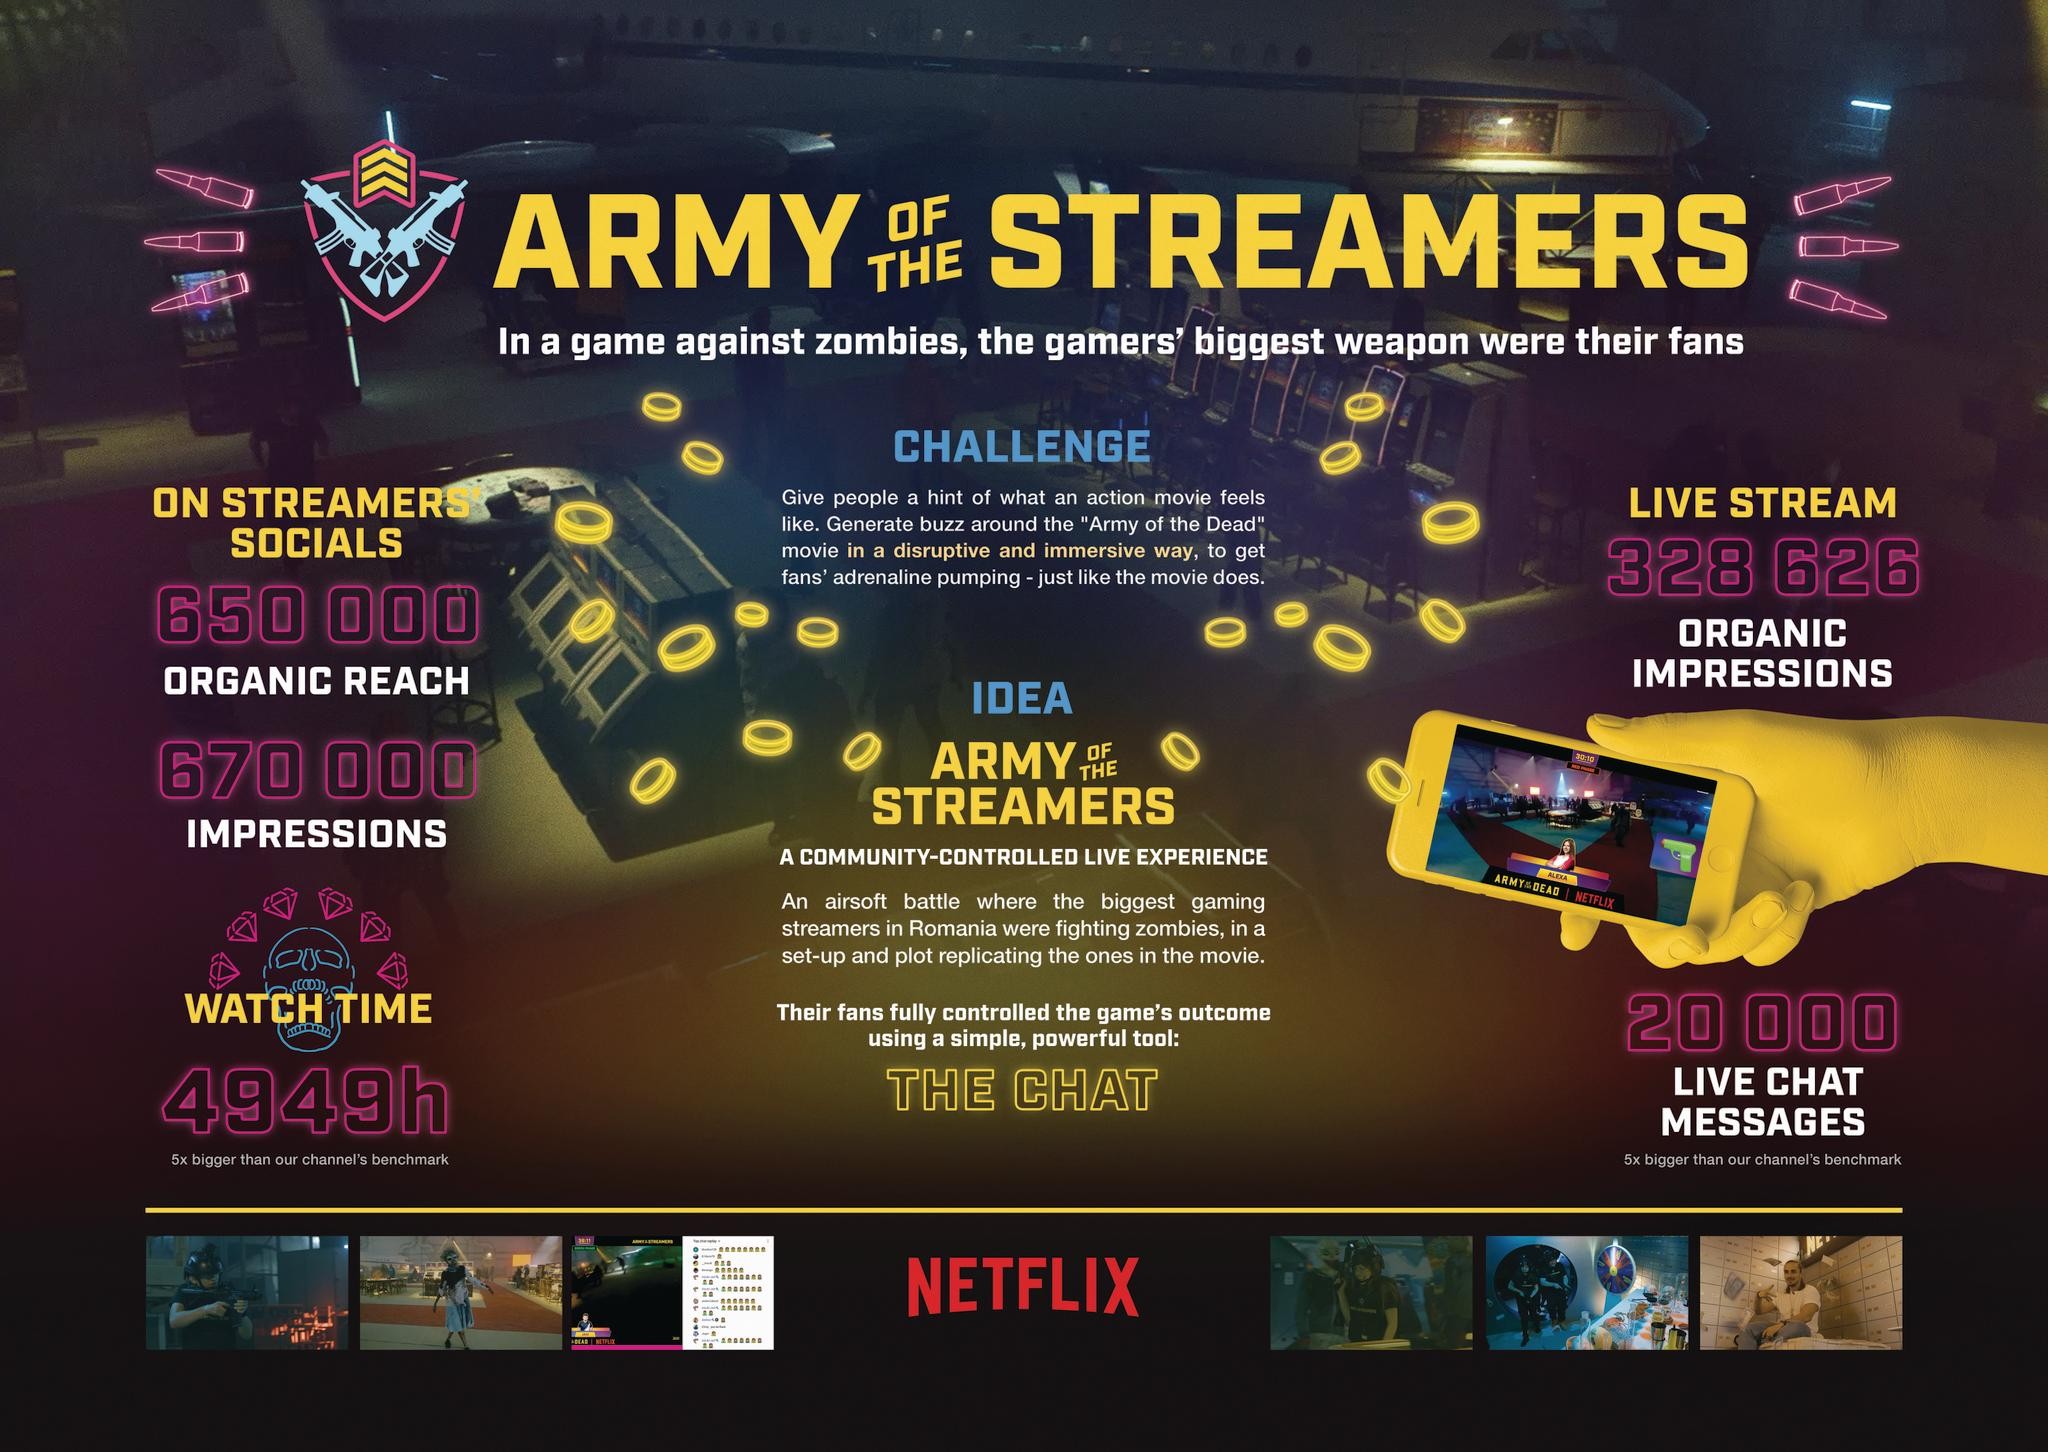 NETFLIX - ARMY OF THE STREAMERS